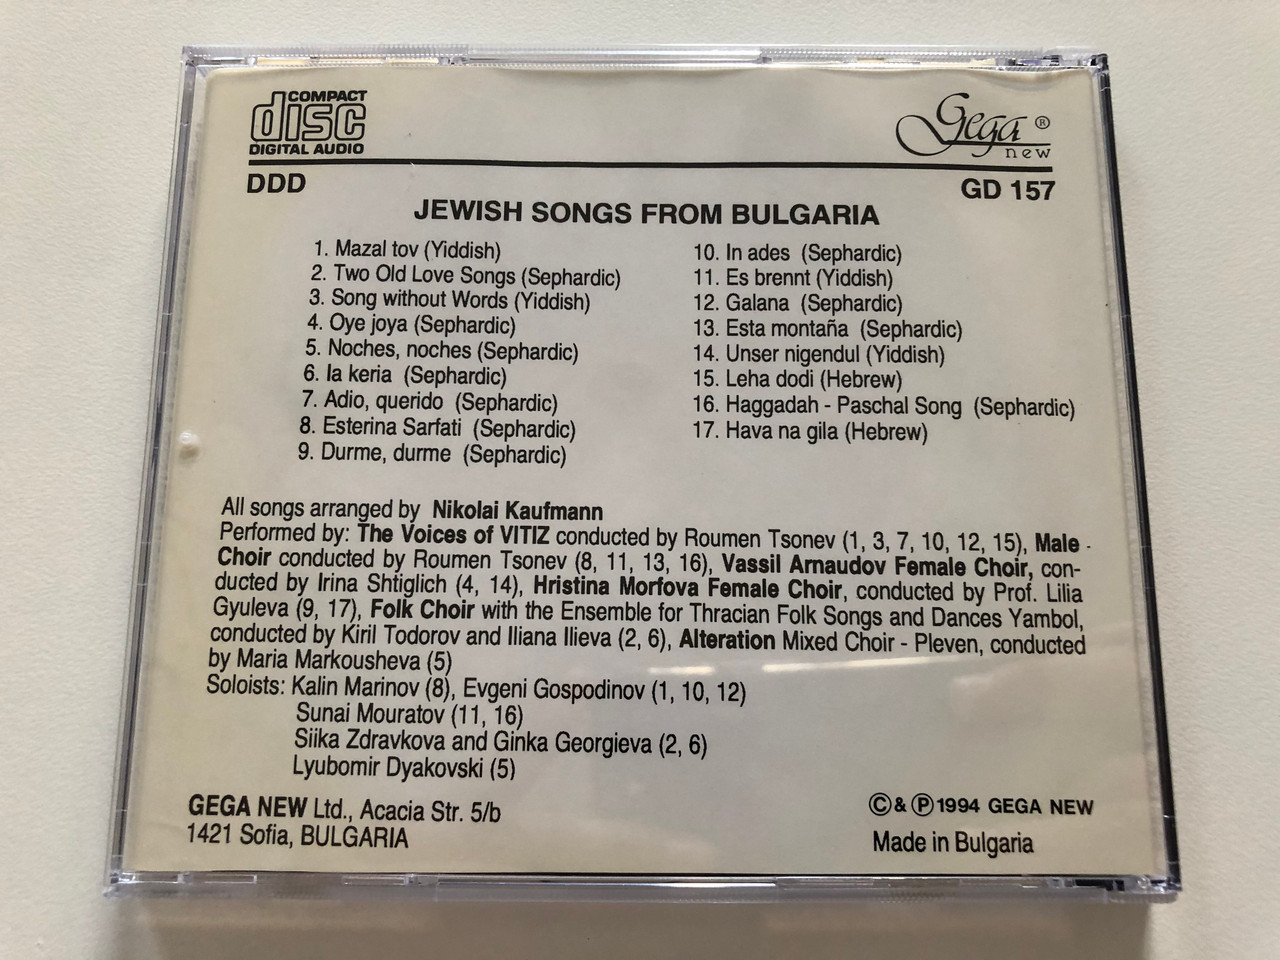 https://cdn10.bigcommerce.com/s-62bdpkt7pb/products/31163/images/183460/Jewish_Songs_From_Bulgaria_Gega_New_Audio_CD_1994_GD_157_6__16559.1625585385.1280.1280.JPG?c=2